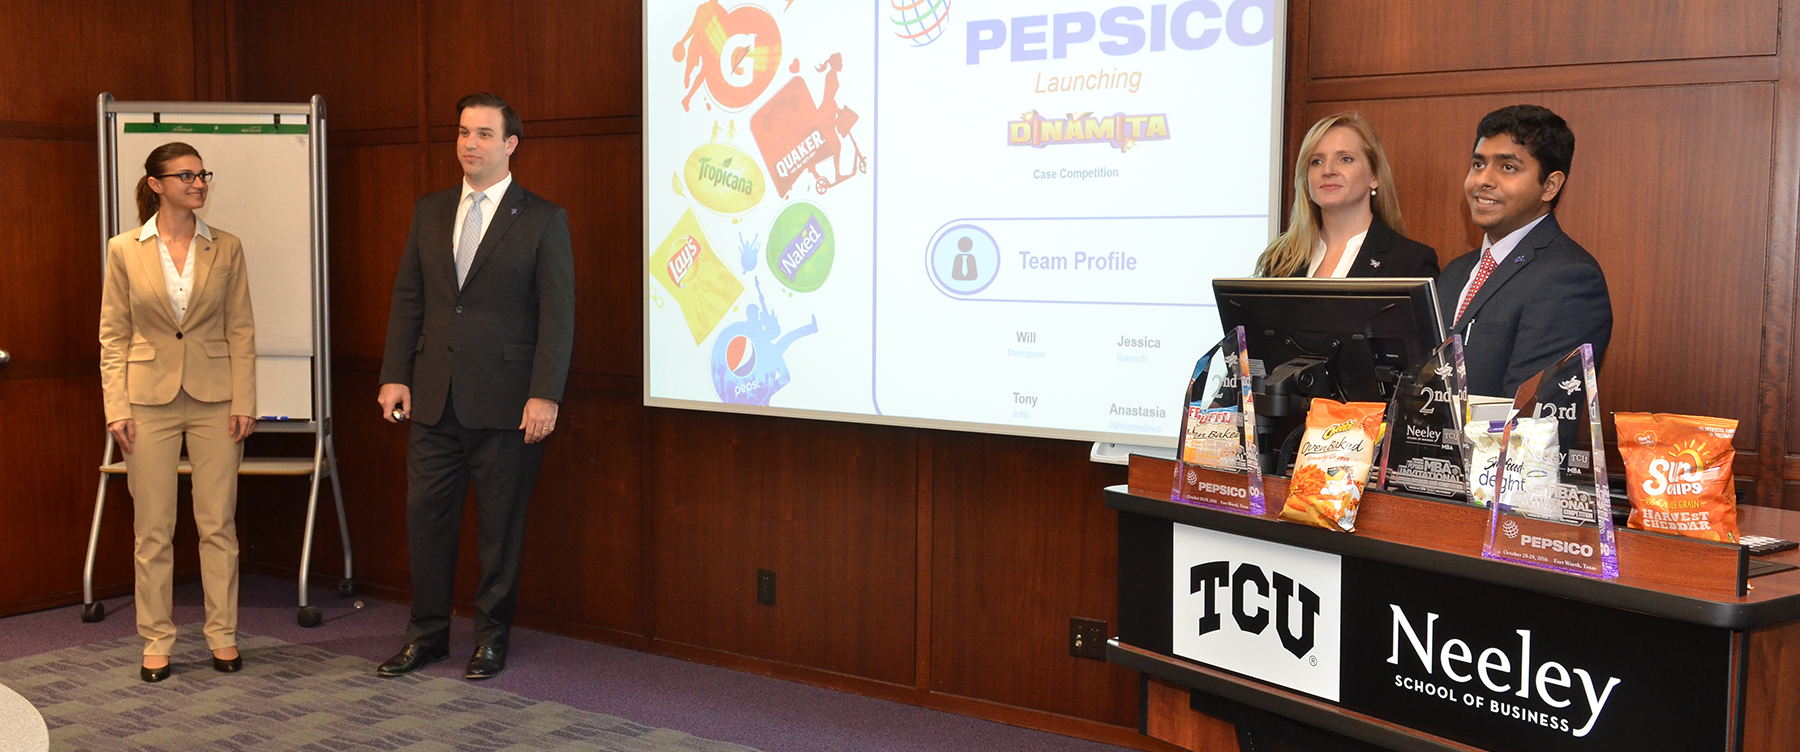 Section Image: PepsiCo Case Competition 